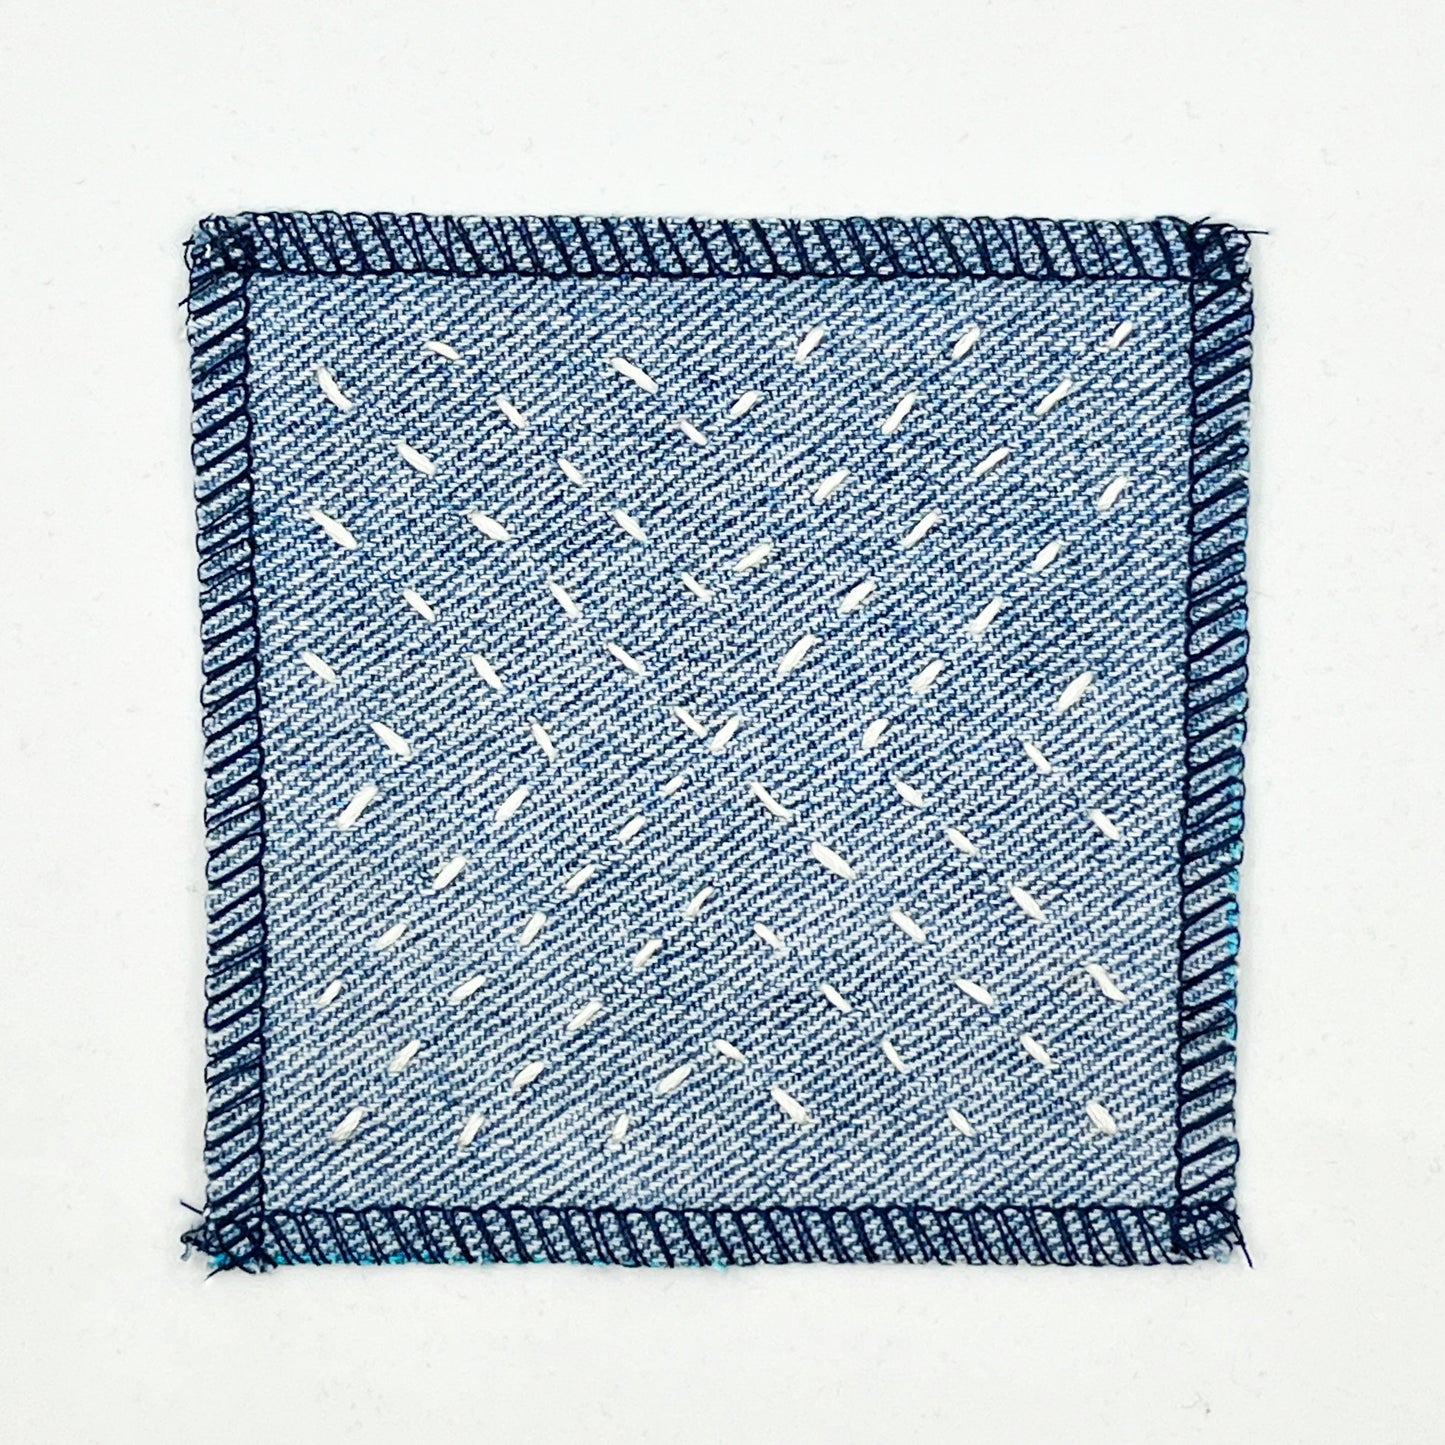 a square patch made out of denim, handstitched with ivory running stitches in a radiating X pattern, with overlocked edges, on a white background